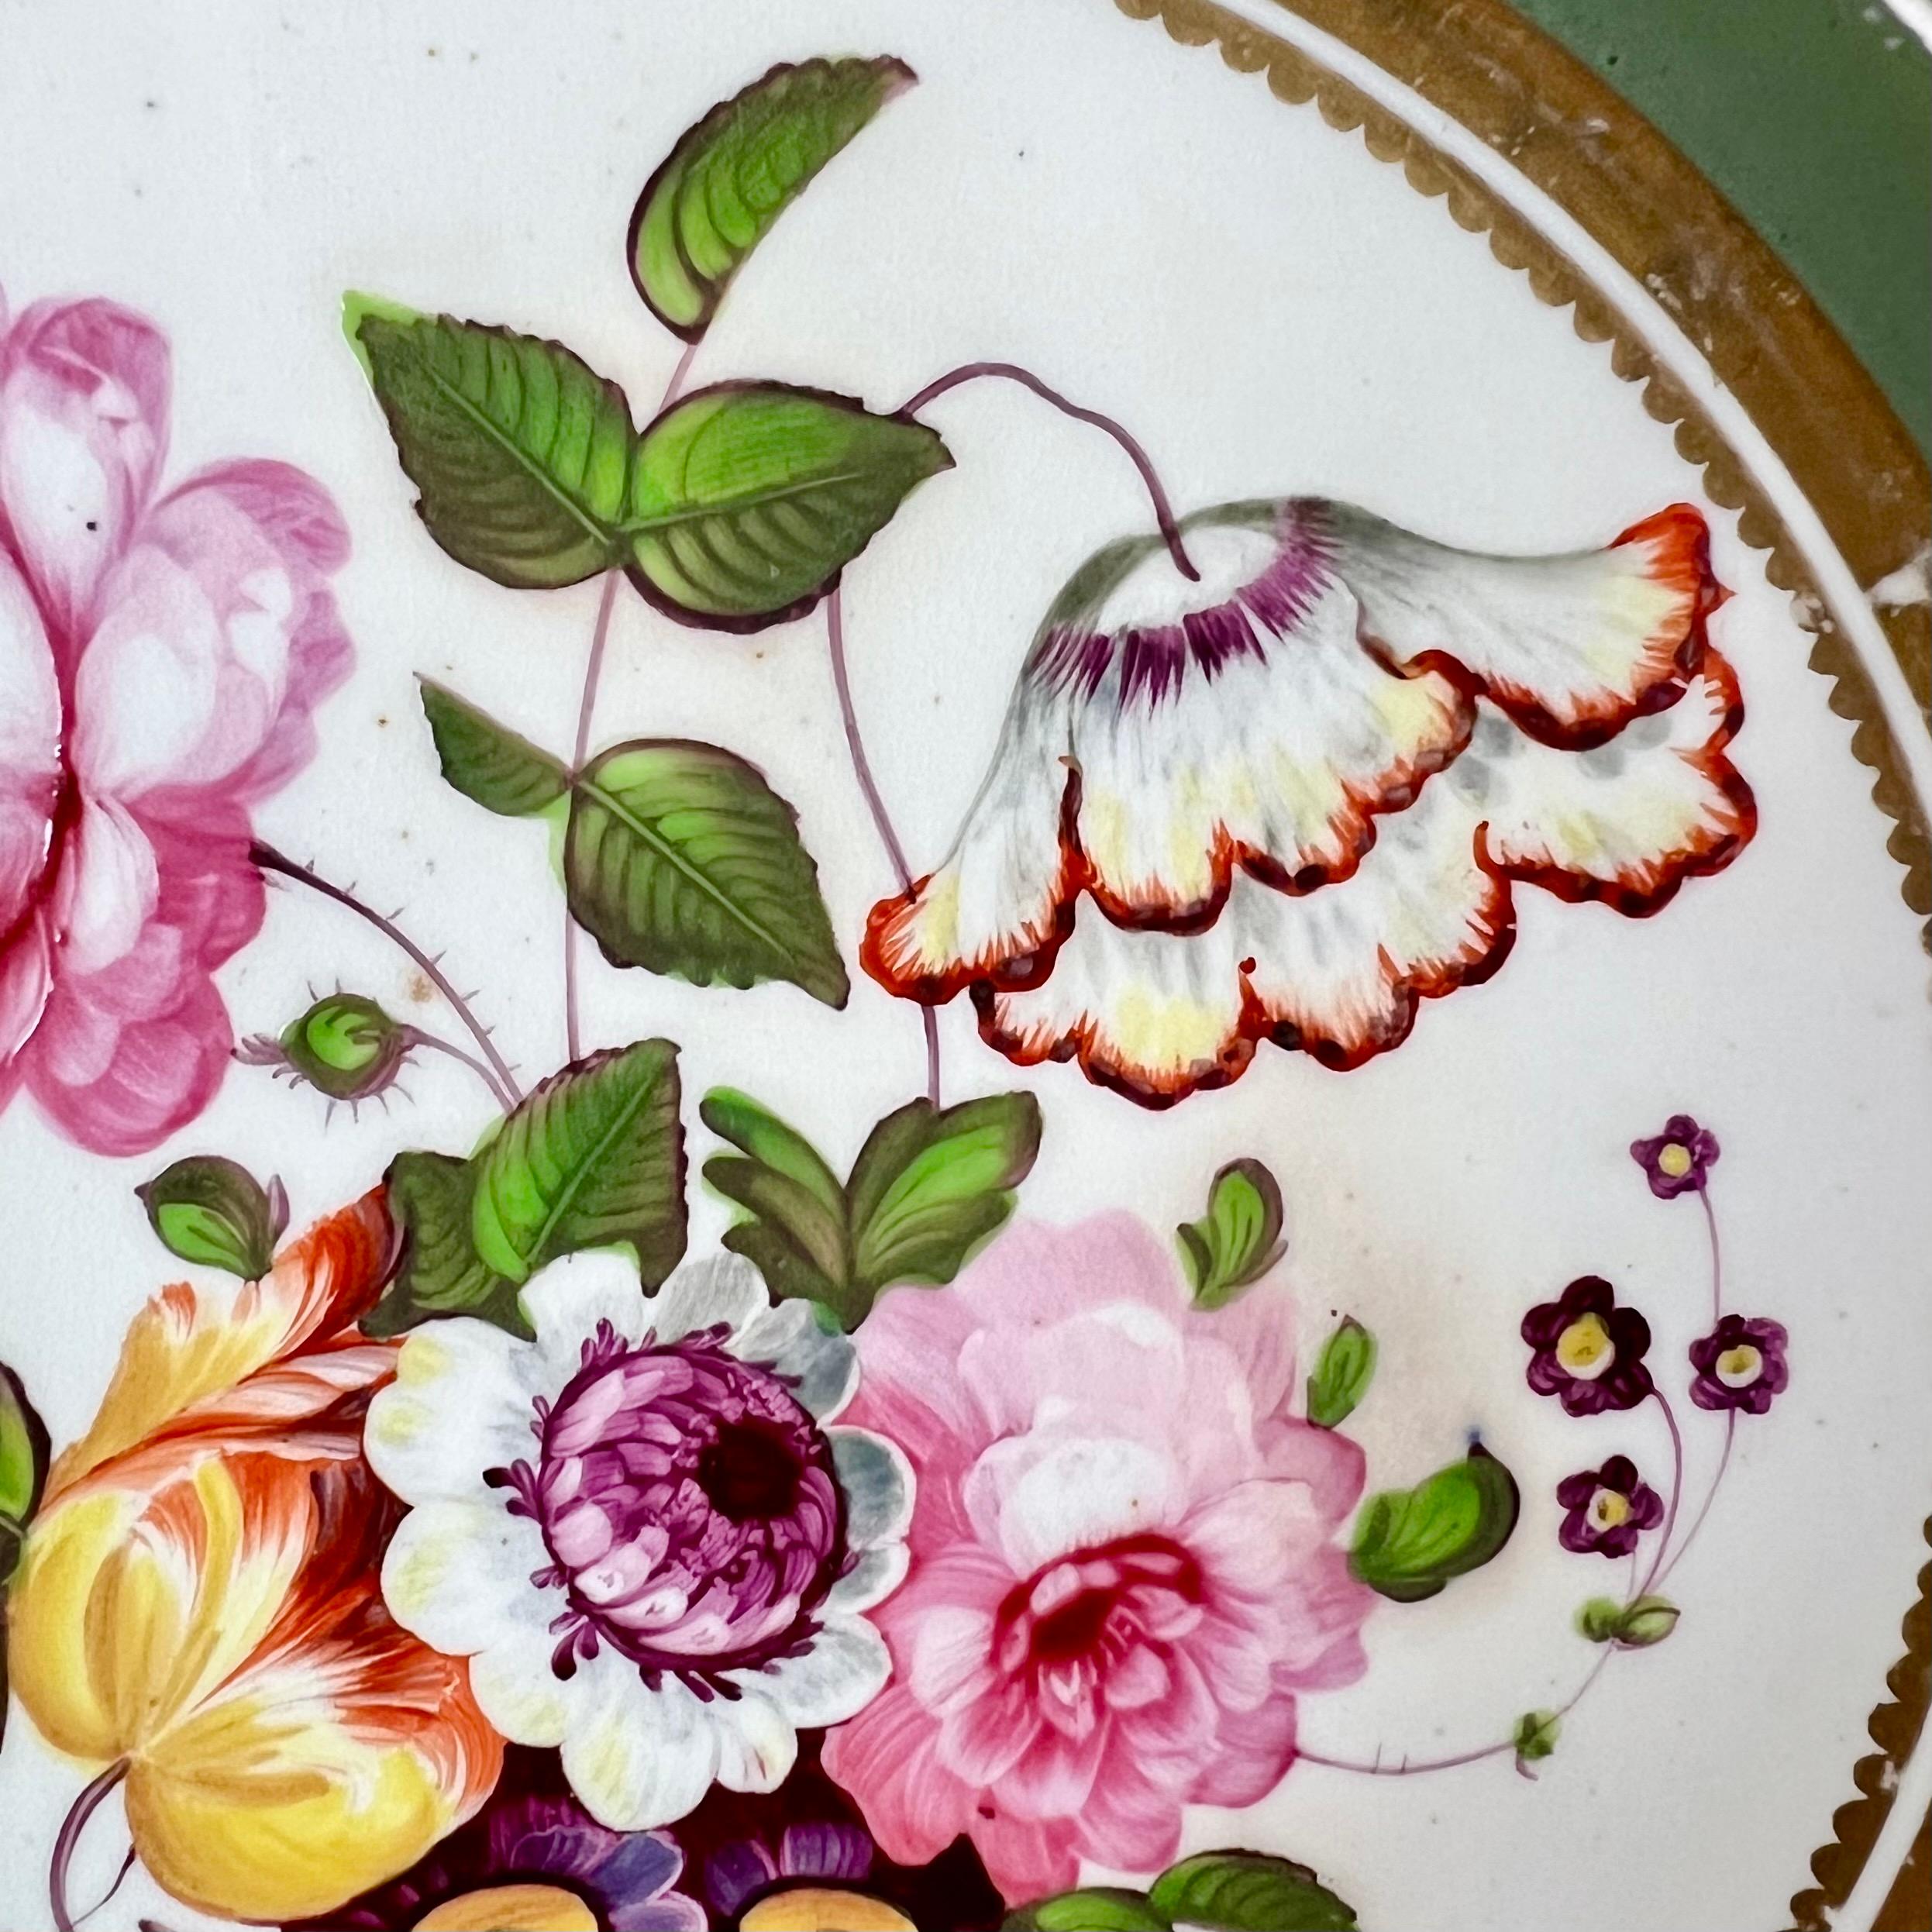 Hand-Painted Samuel Alcock Plate, Melted Snow Border, Sepia Green with Flowers, ca 1822